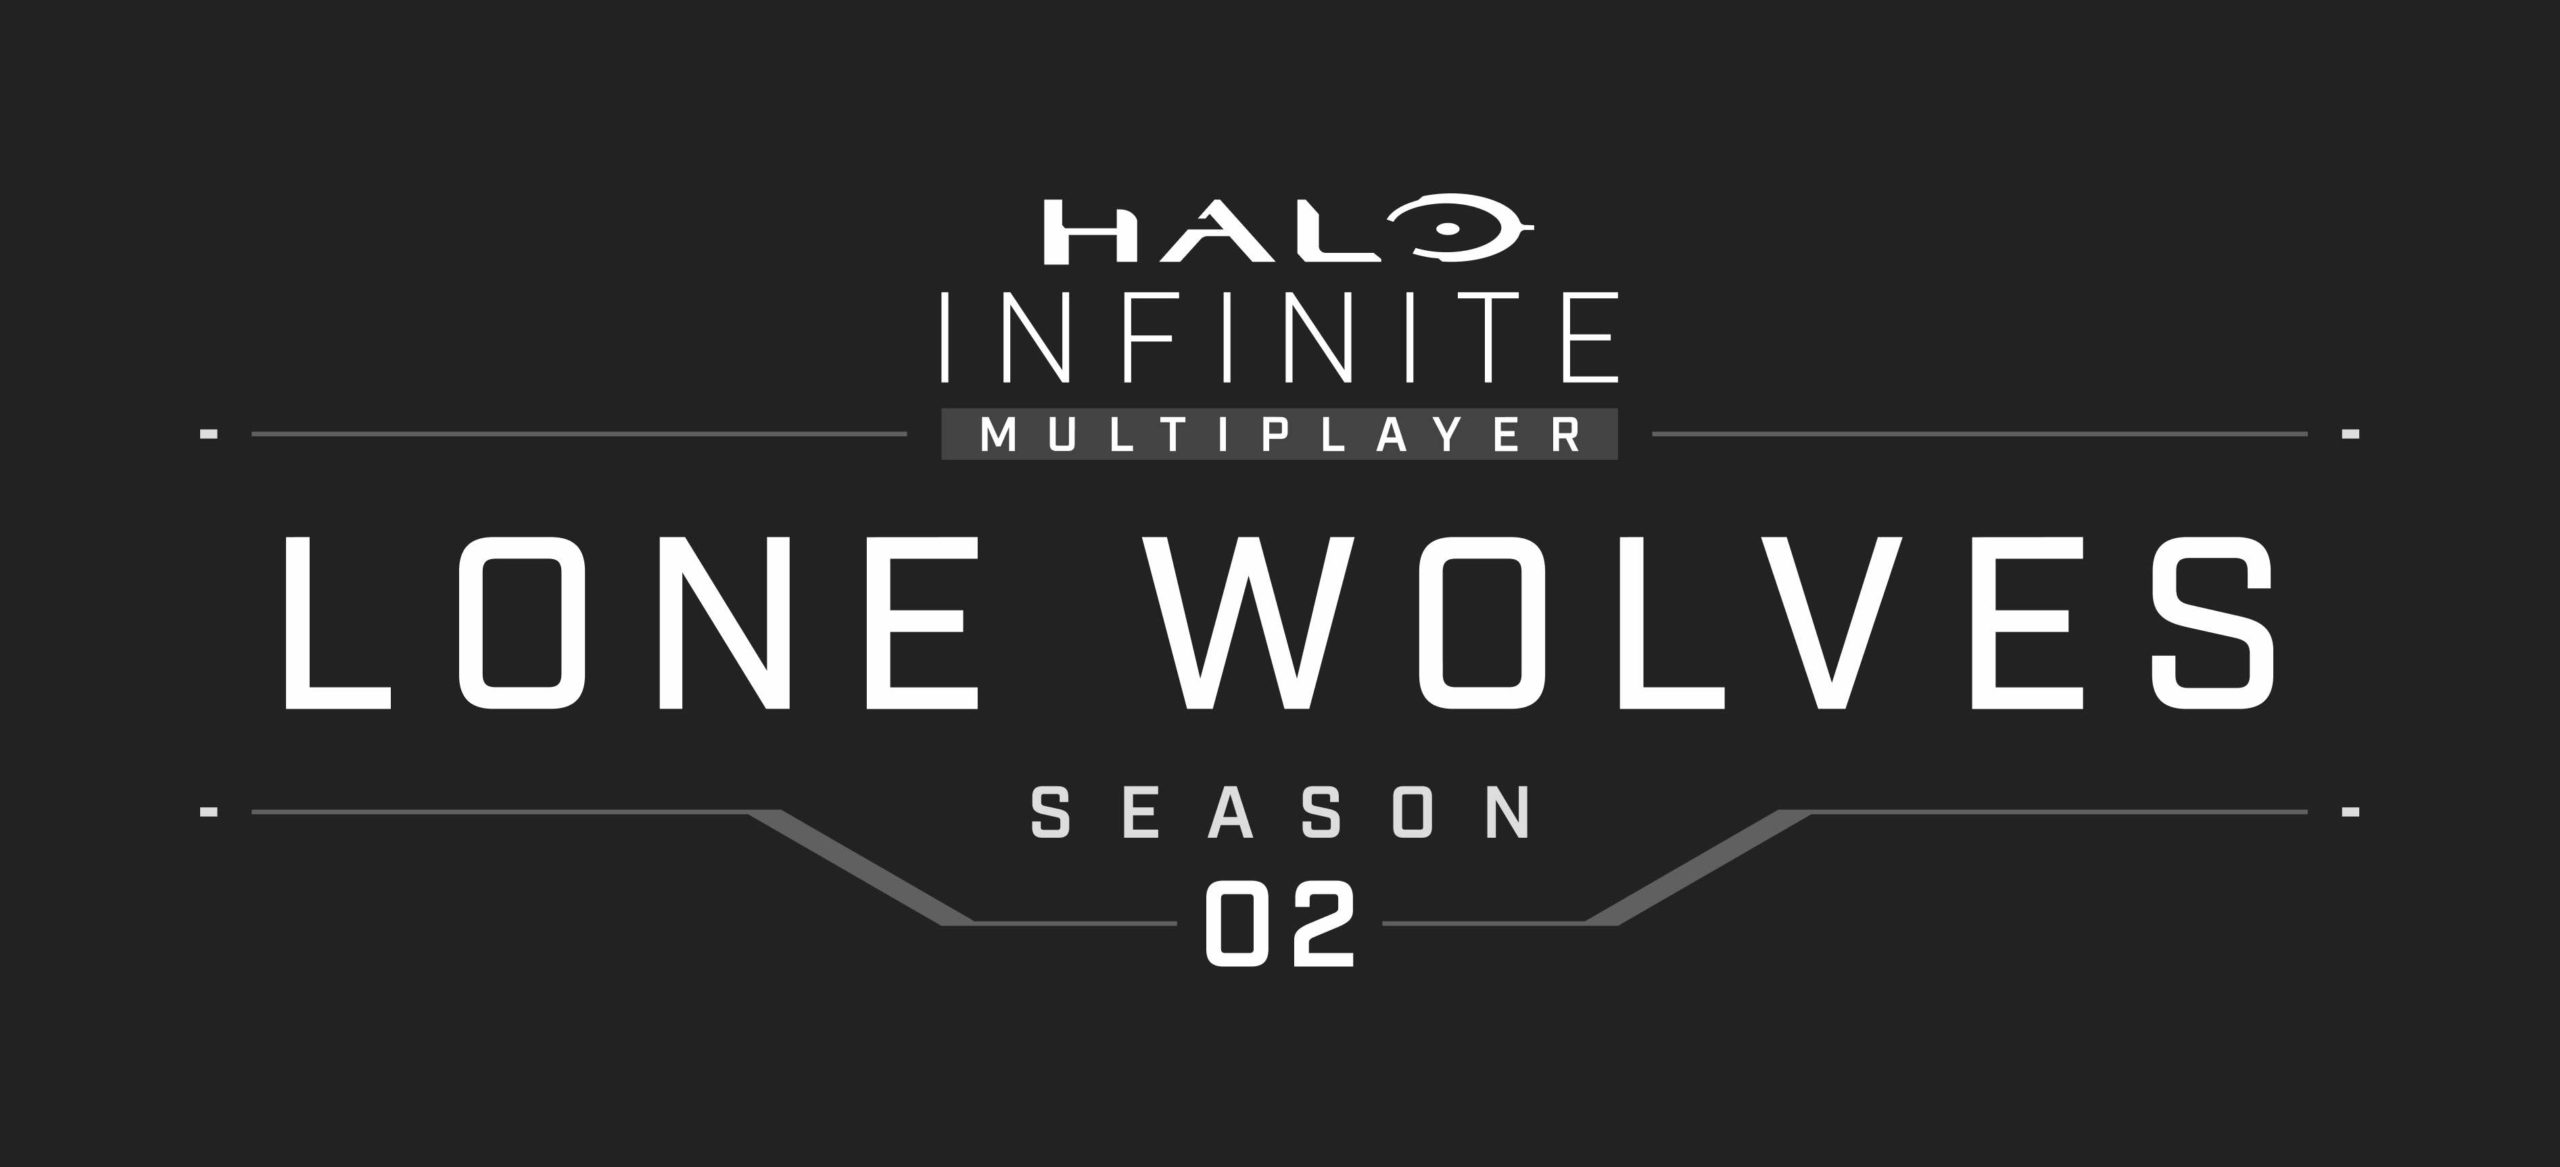 Halo Infinite Multiplayer Season 2 Is Called Lone Wolves And It Has a  Release Date, Maps, and Modes - IGN